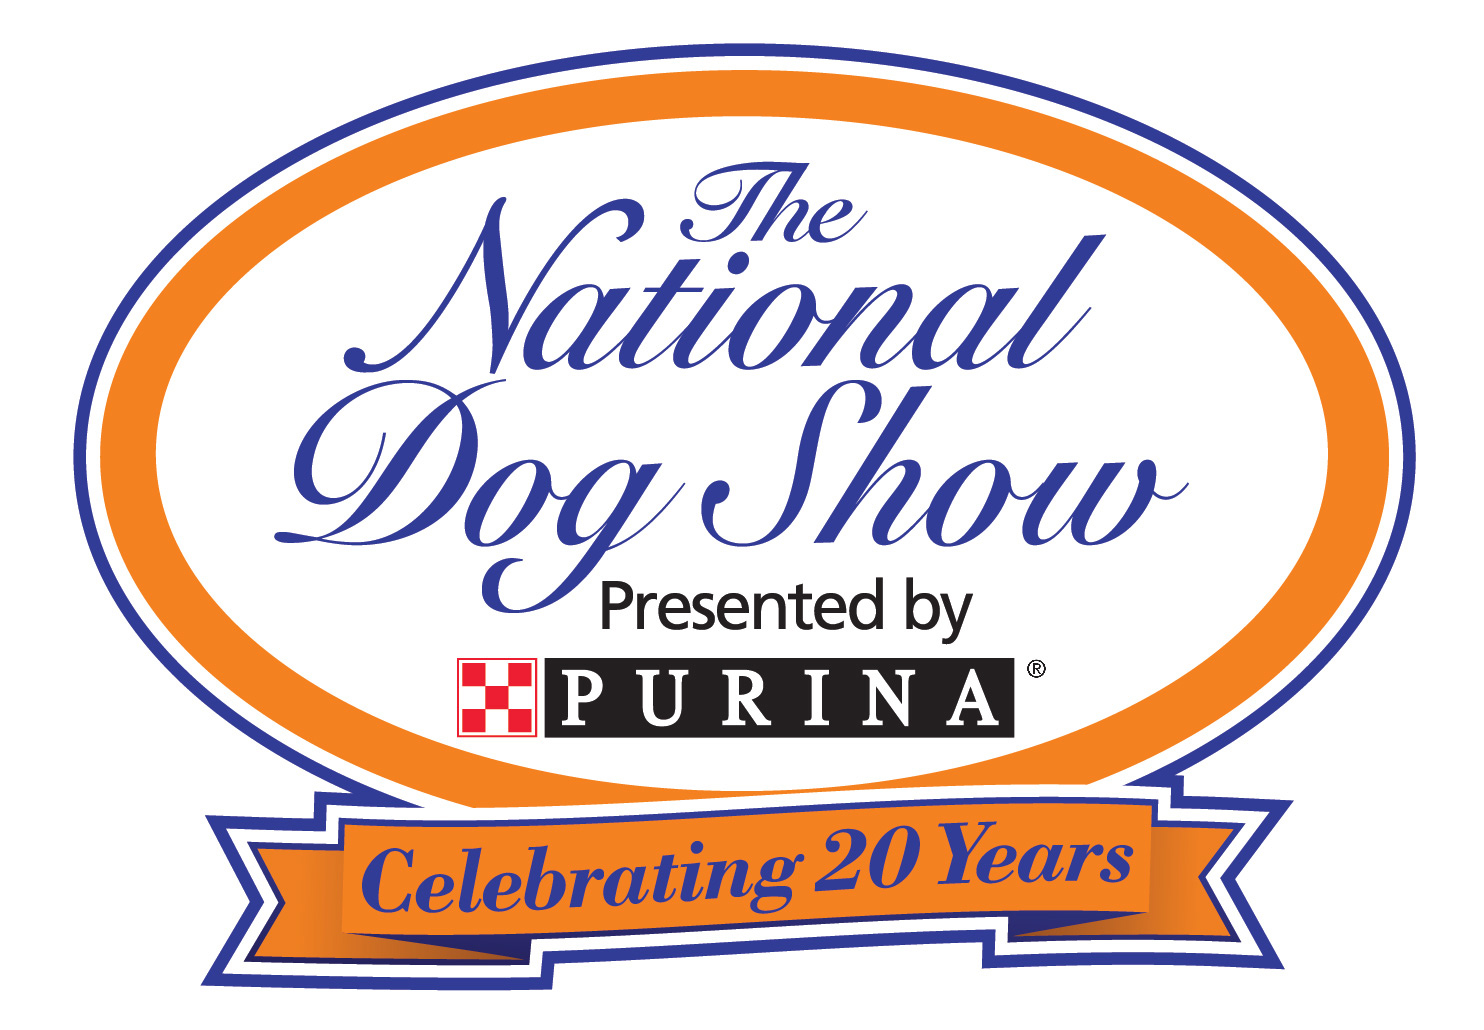 The National Dog Show Presented by Purina will air on NBC at noon (all time zones) on Thanksgiving Day. Watch as over 2,000 dogs compete for Best in Show honors and one is crowned the 2021 champion.